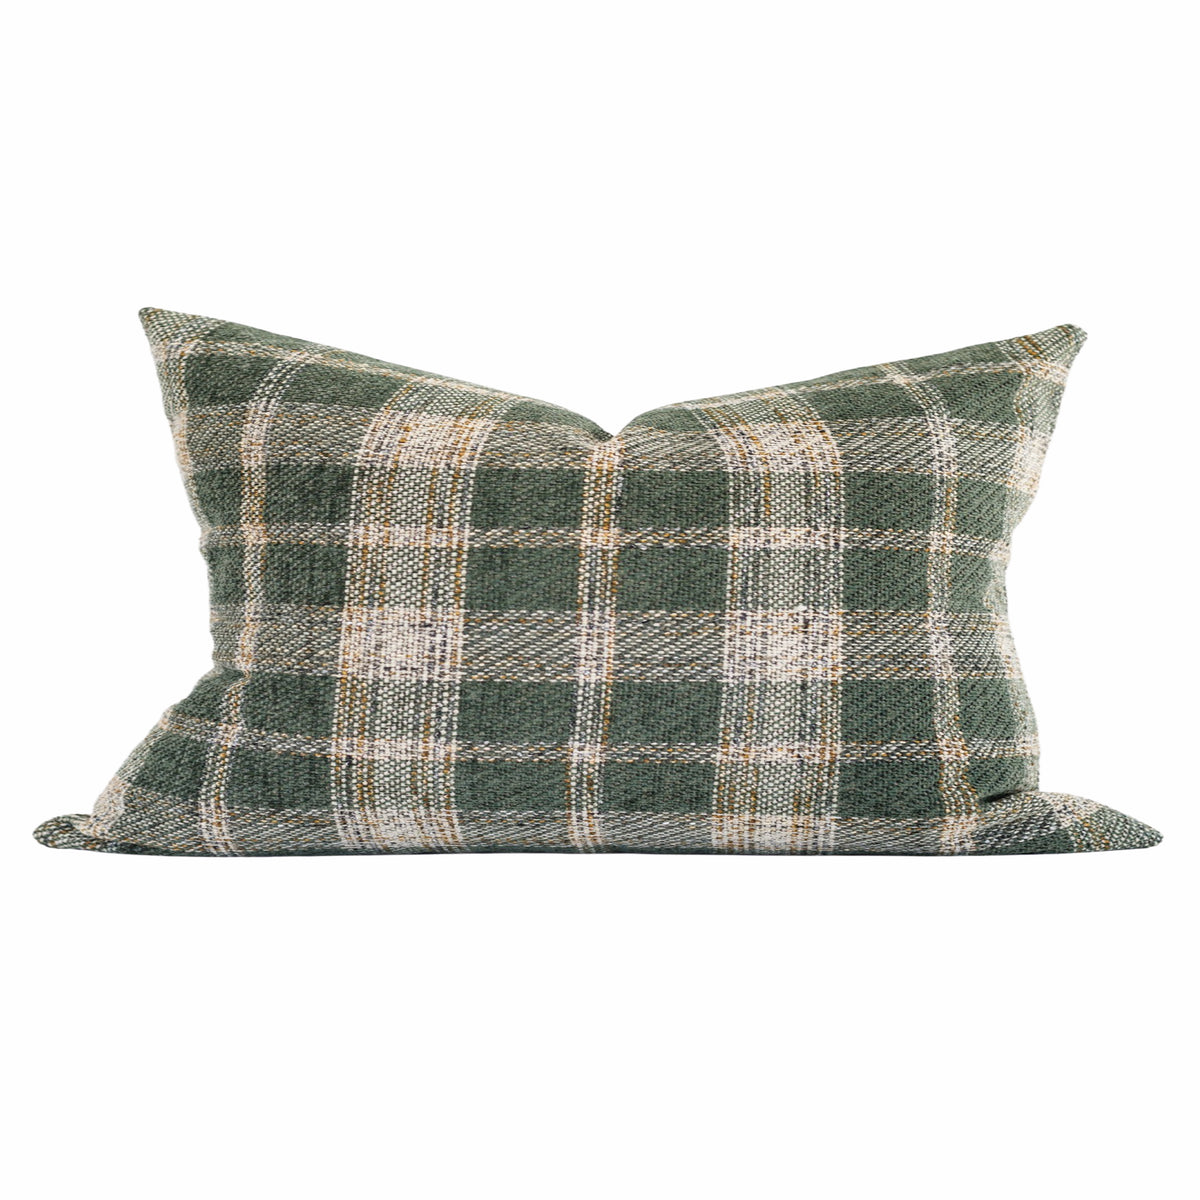 Baylor Pillow Cover